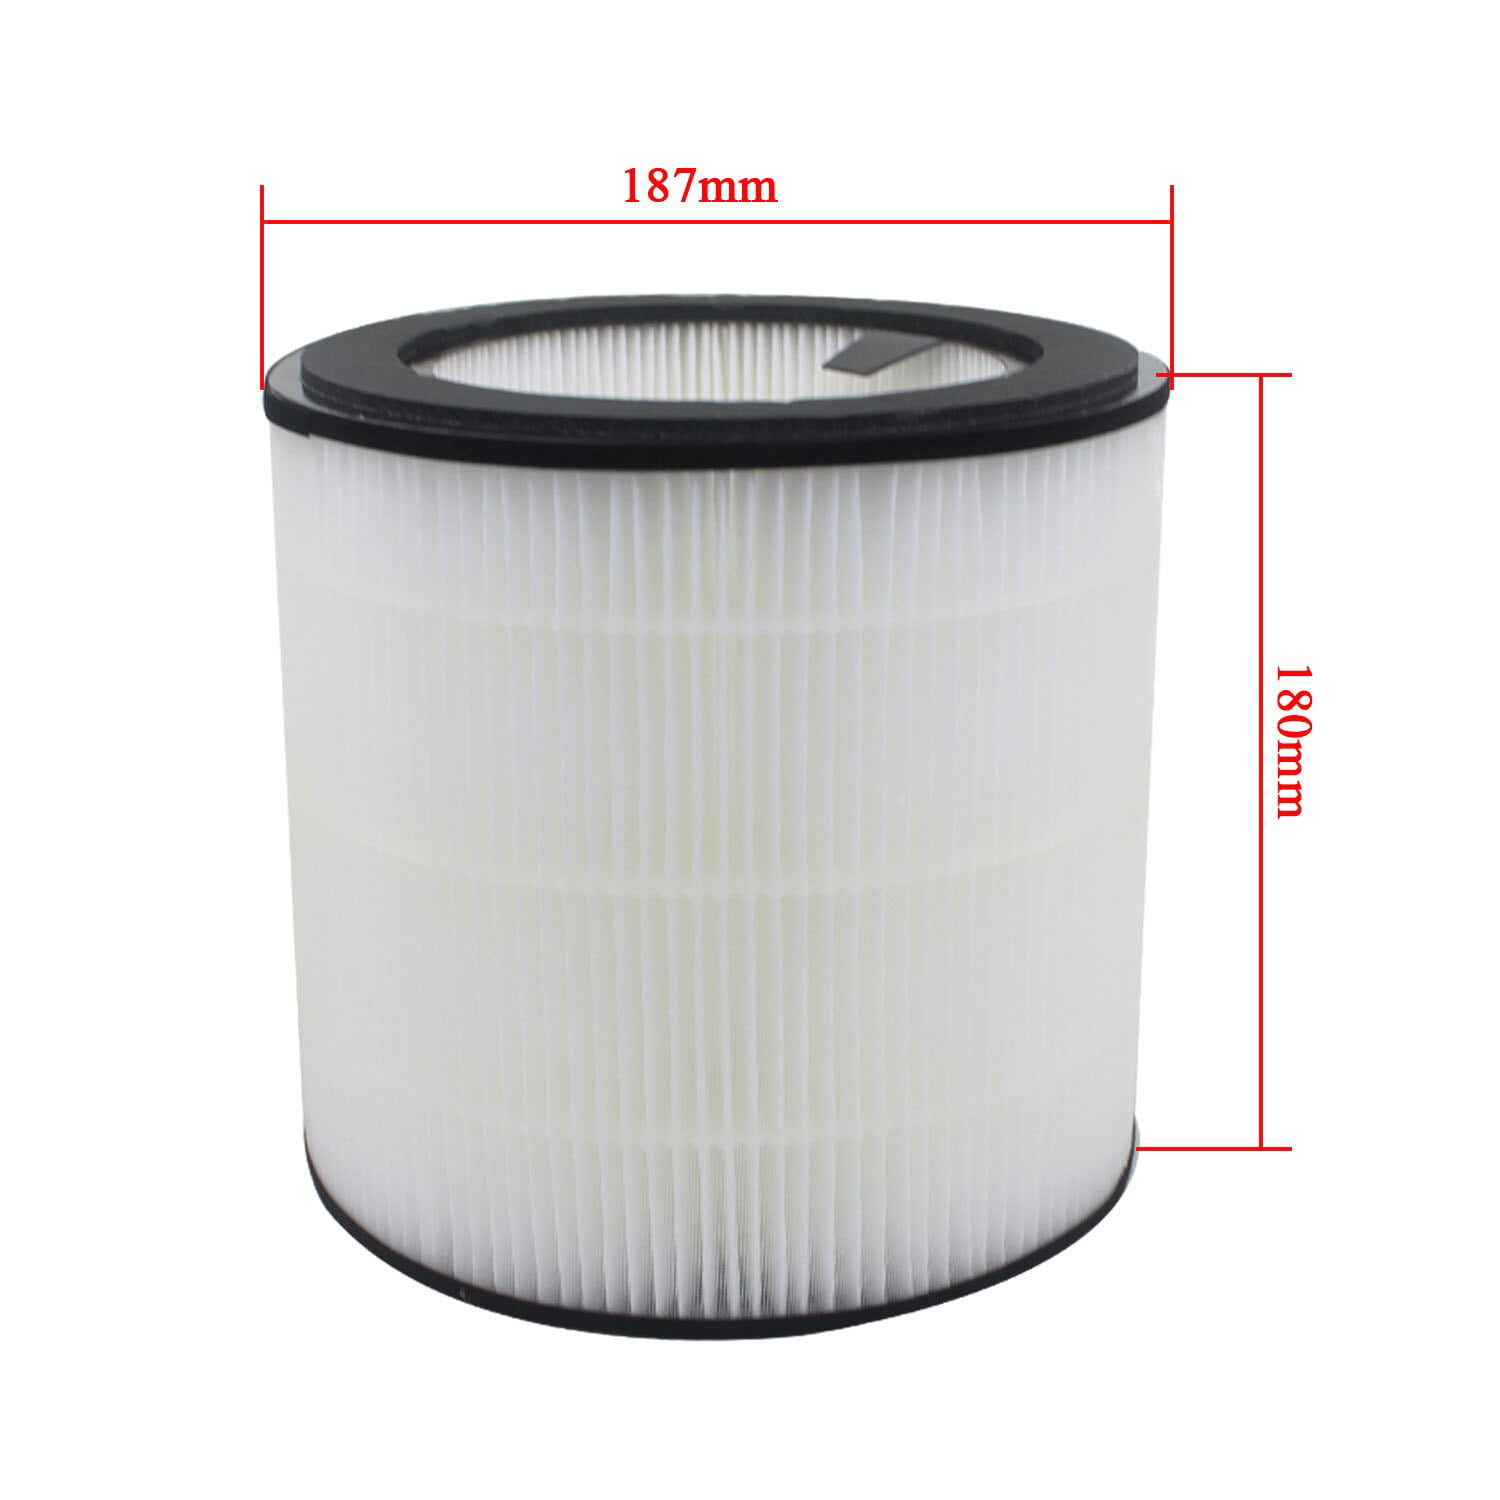 HEPA Filter Replacement Part For Philips 800 Series Air Purifiers